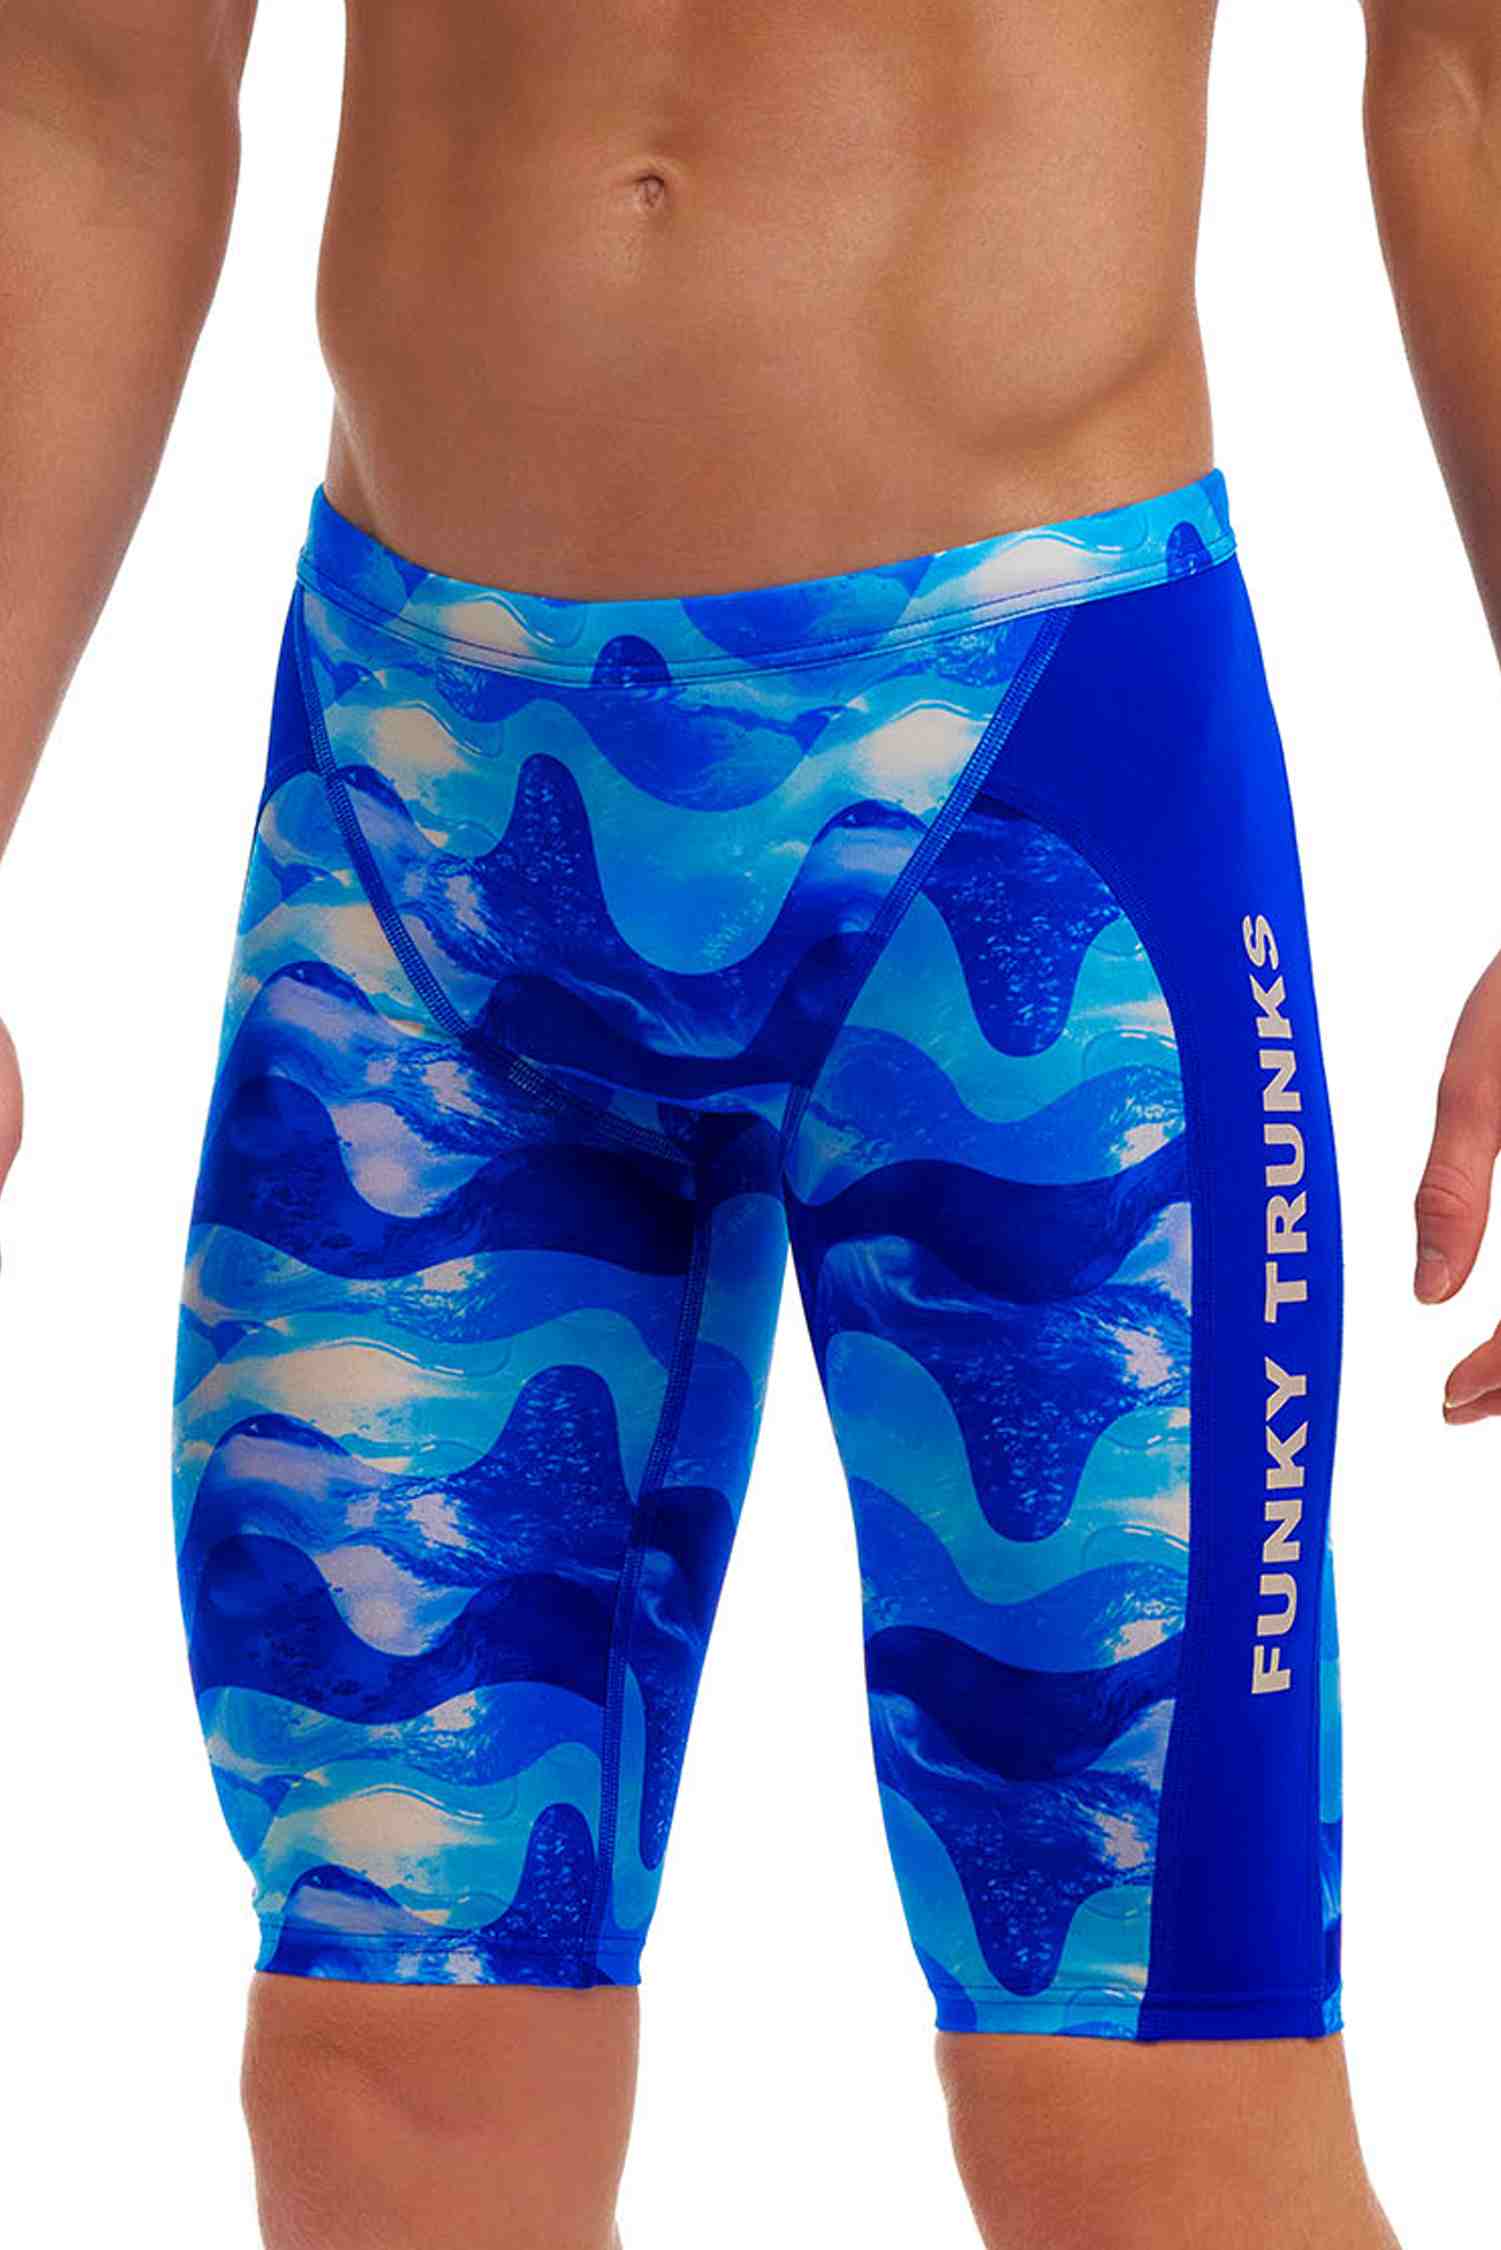 Funky Trunks Boys Training Jammers - Dive In